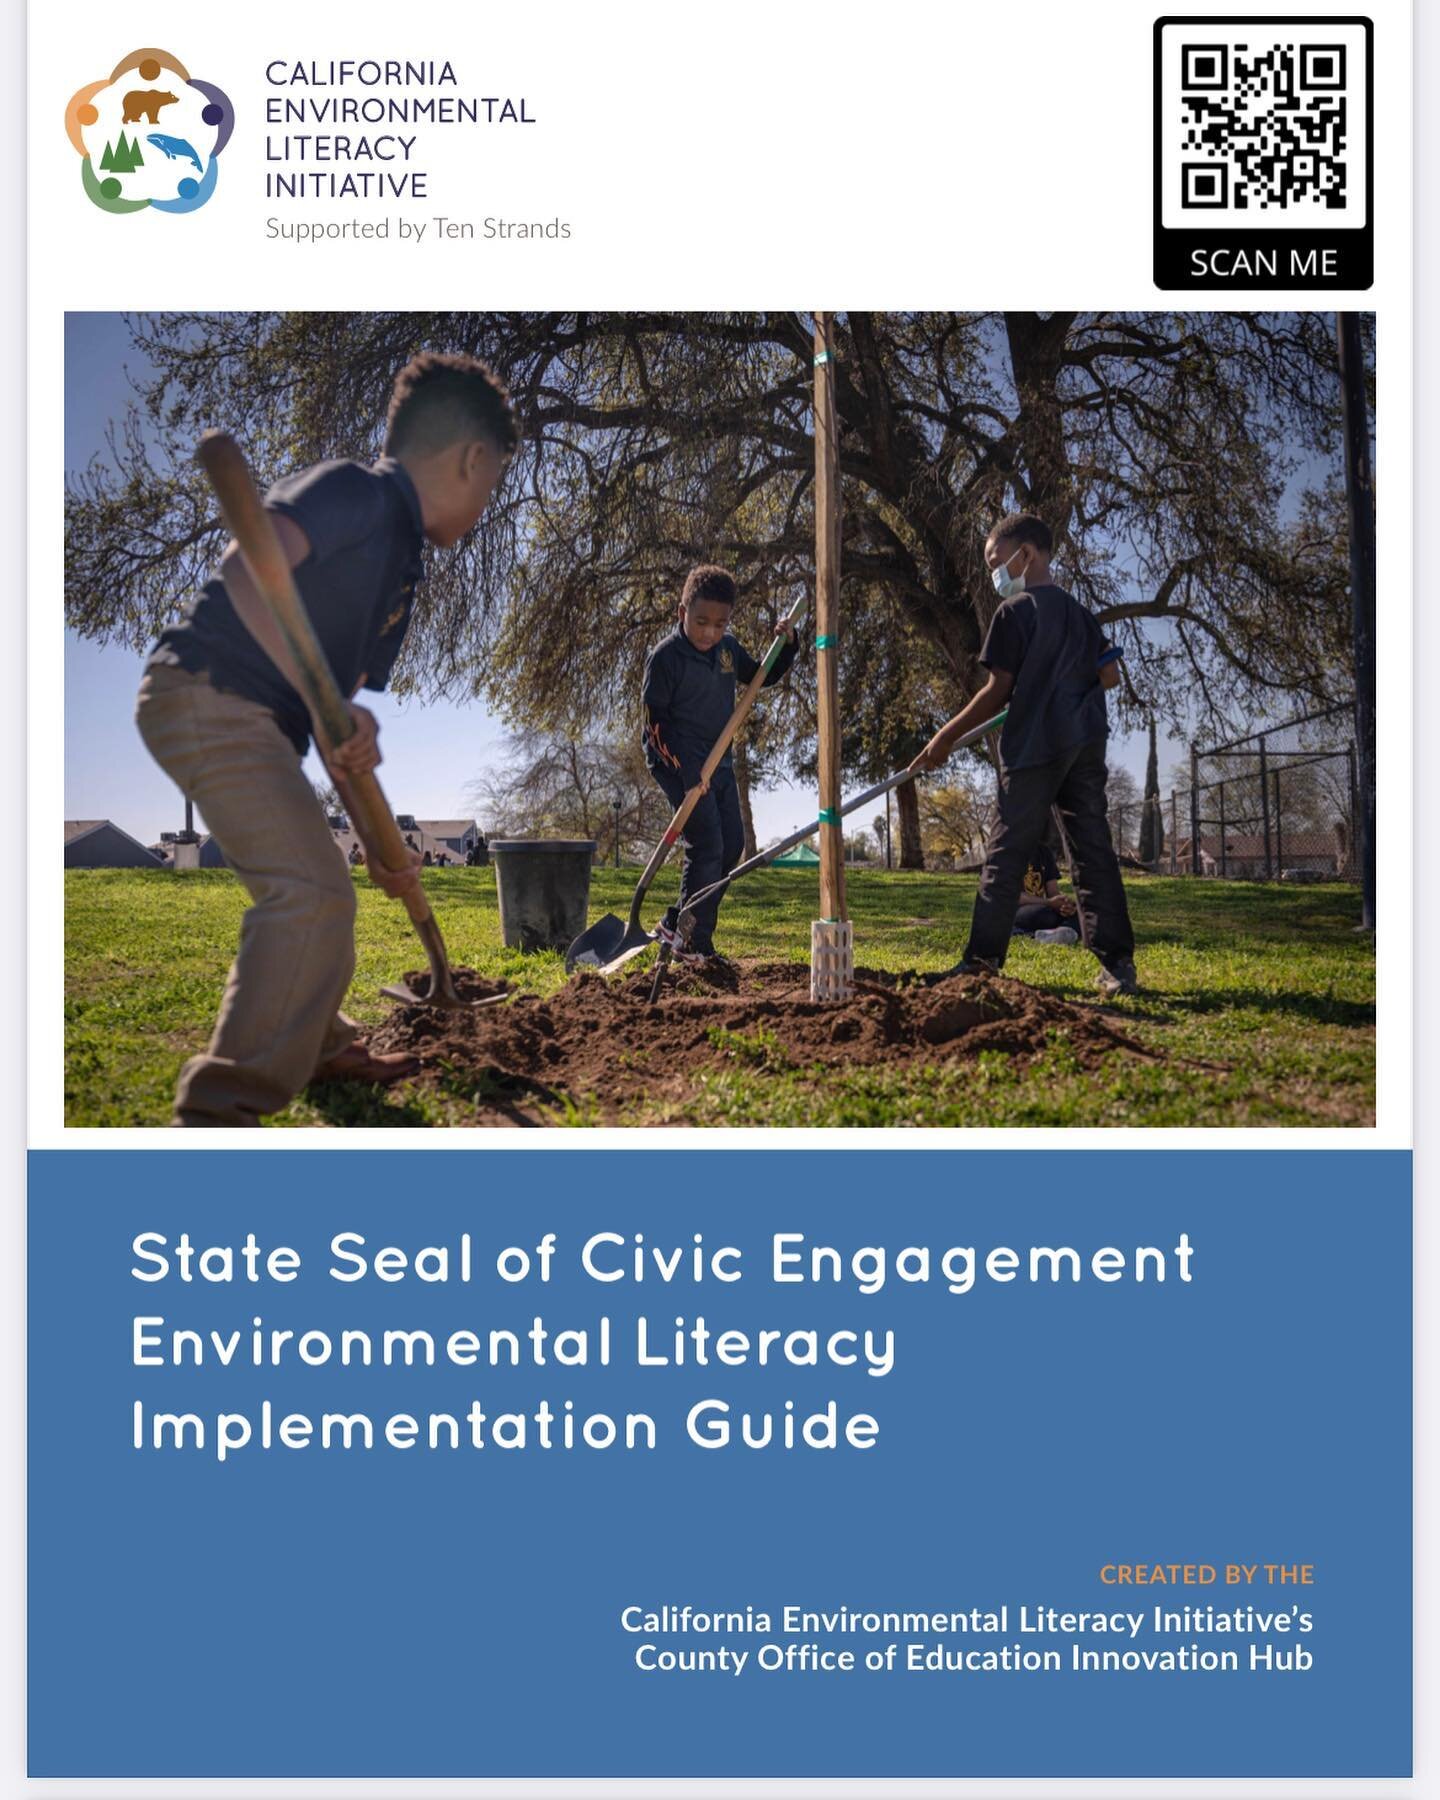 Our 2nd graders made the cover of @calenvirolit State Seal of Civic Engagement Environmental Literacy Implementation Guide! Thank you for recognizing our students&rsquo; leadership for climate justice as they sought to bring more tree equity to their